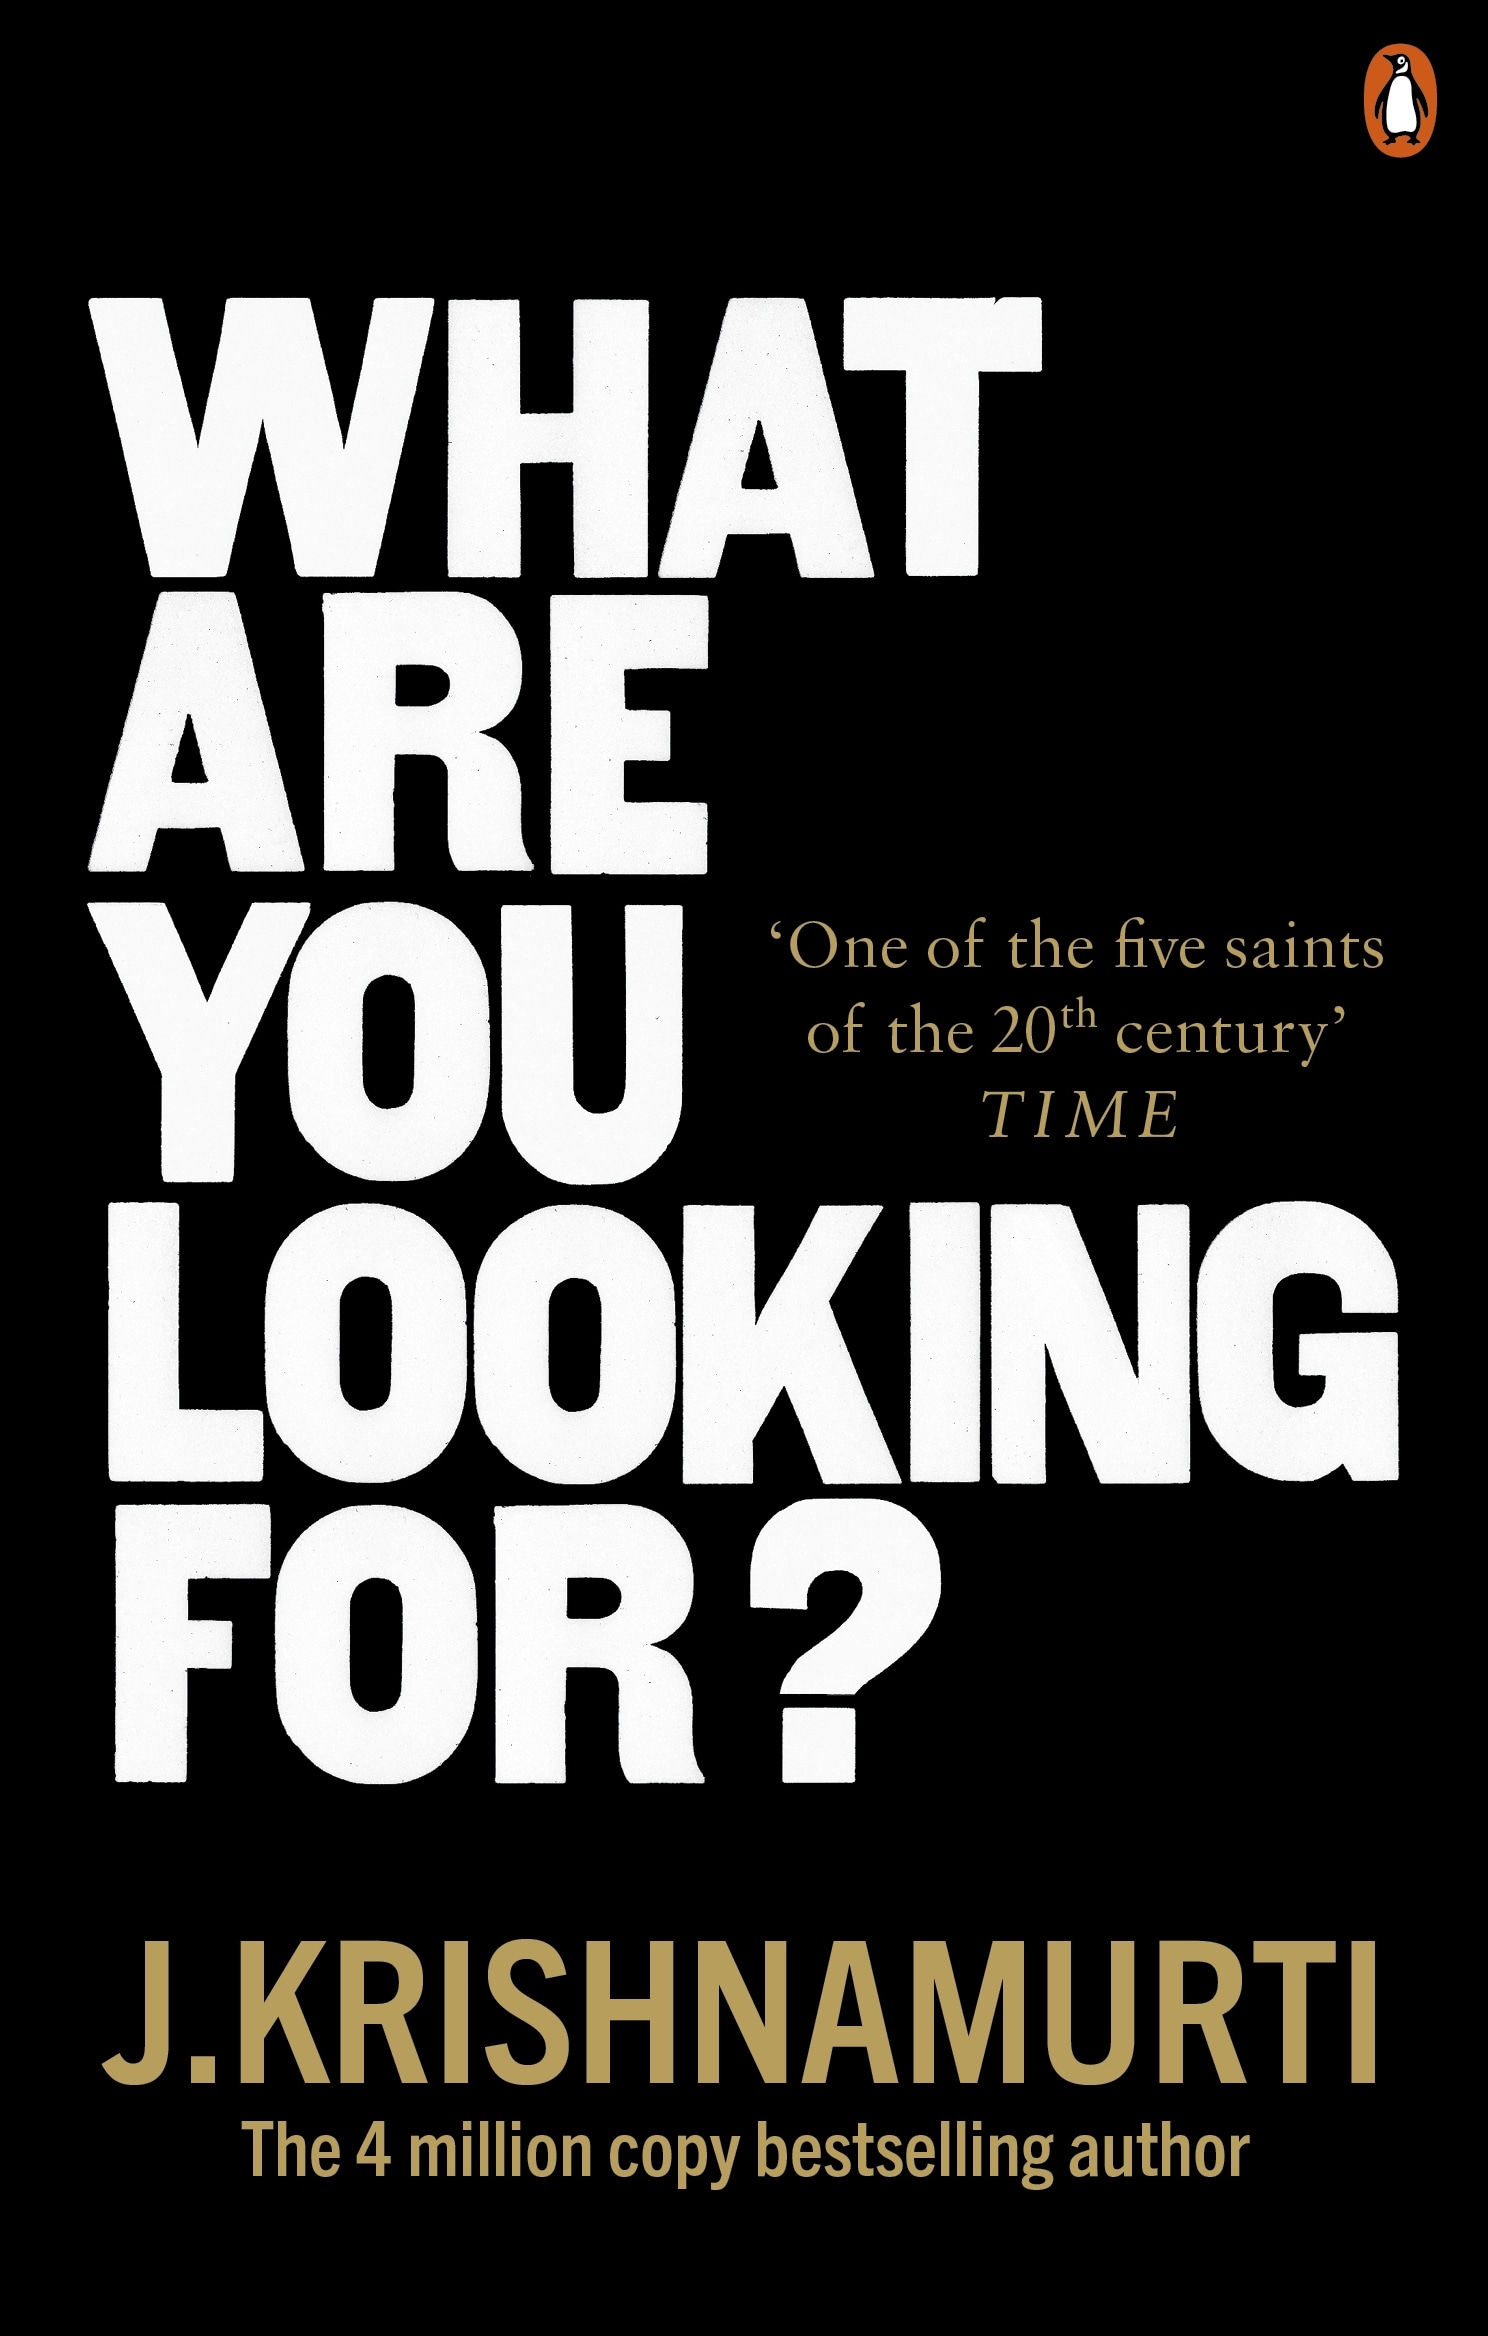 Book “What Are You Looking For?” by J. Krishnamurti — April 8, 2021